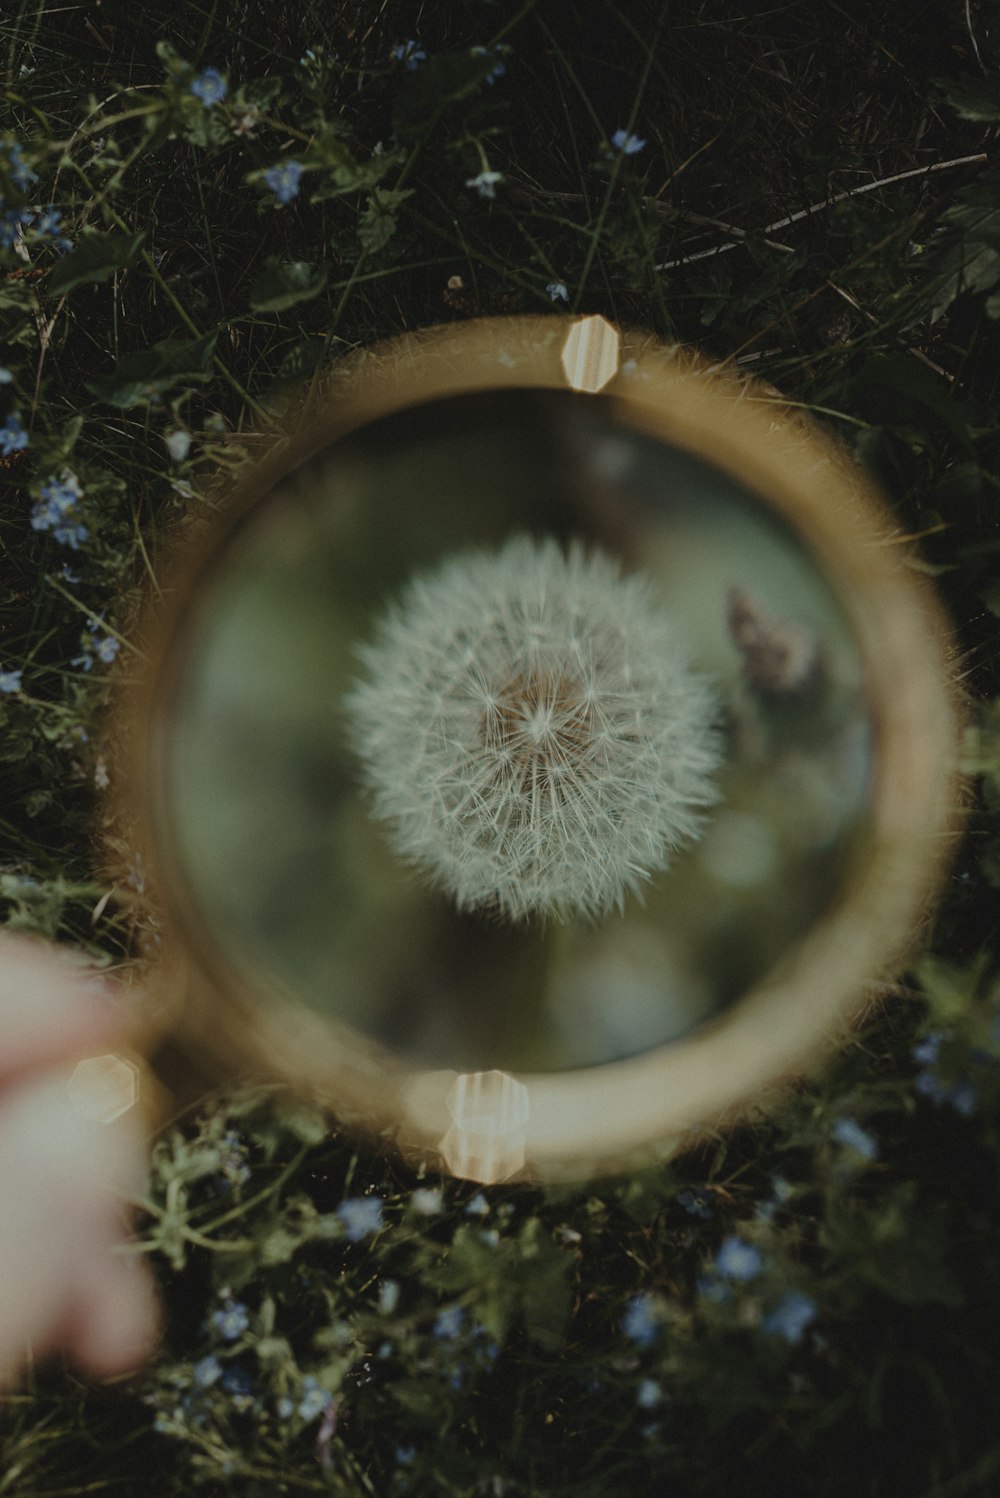 a person holding a magnifying glass looking at a dandelion